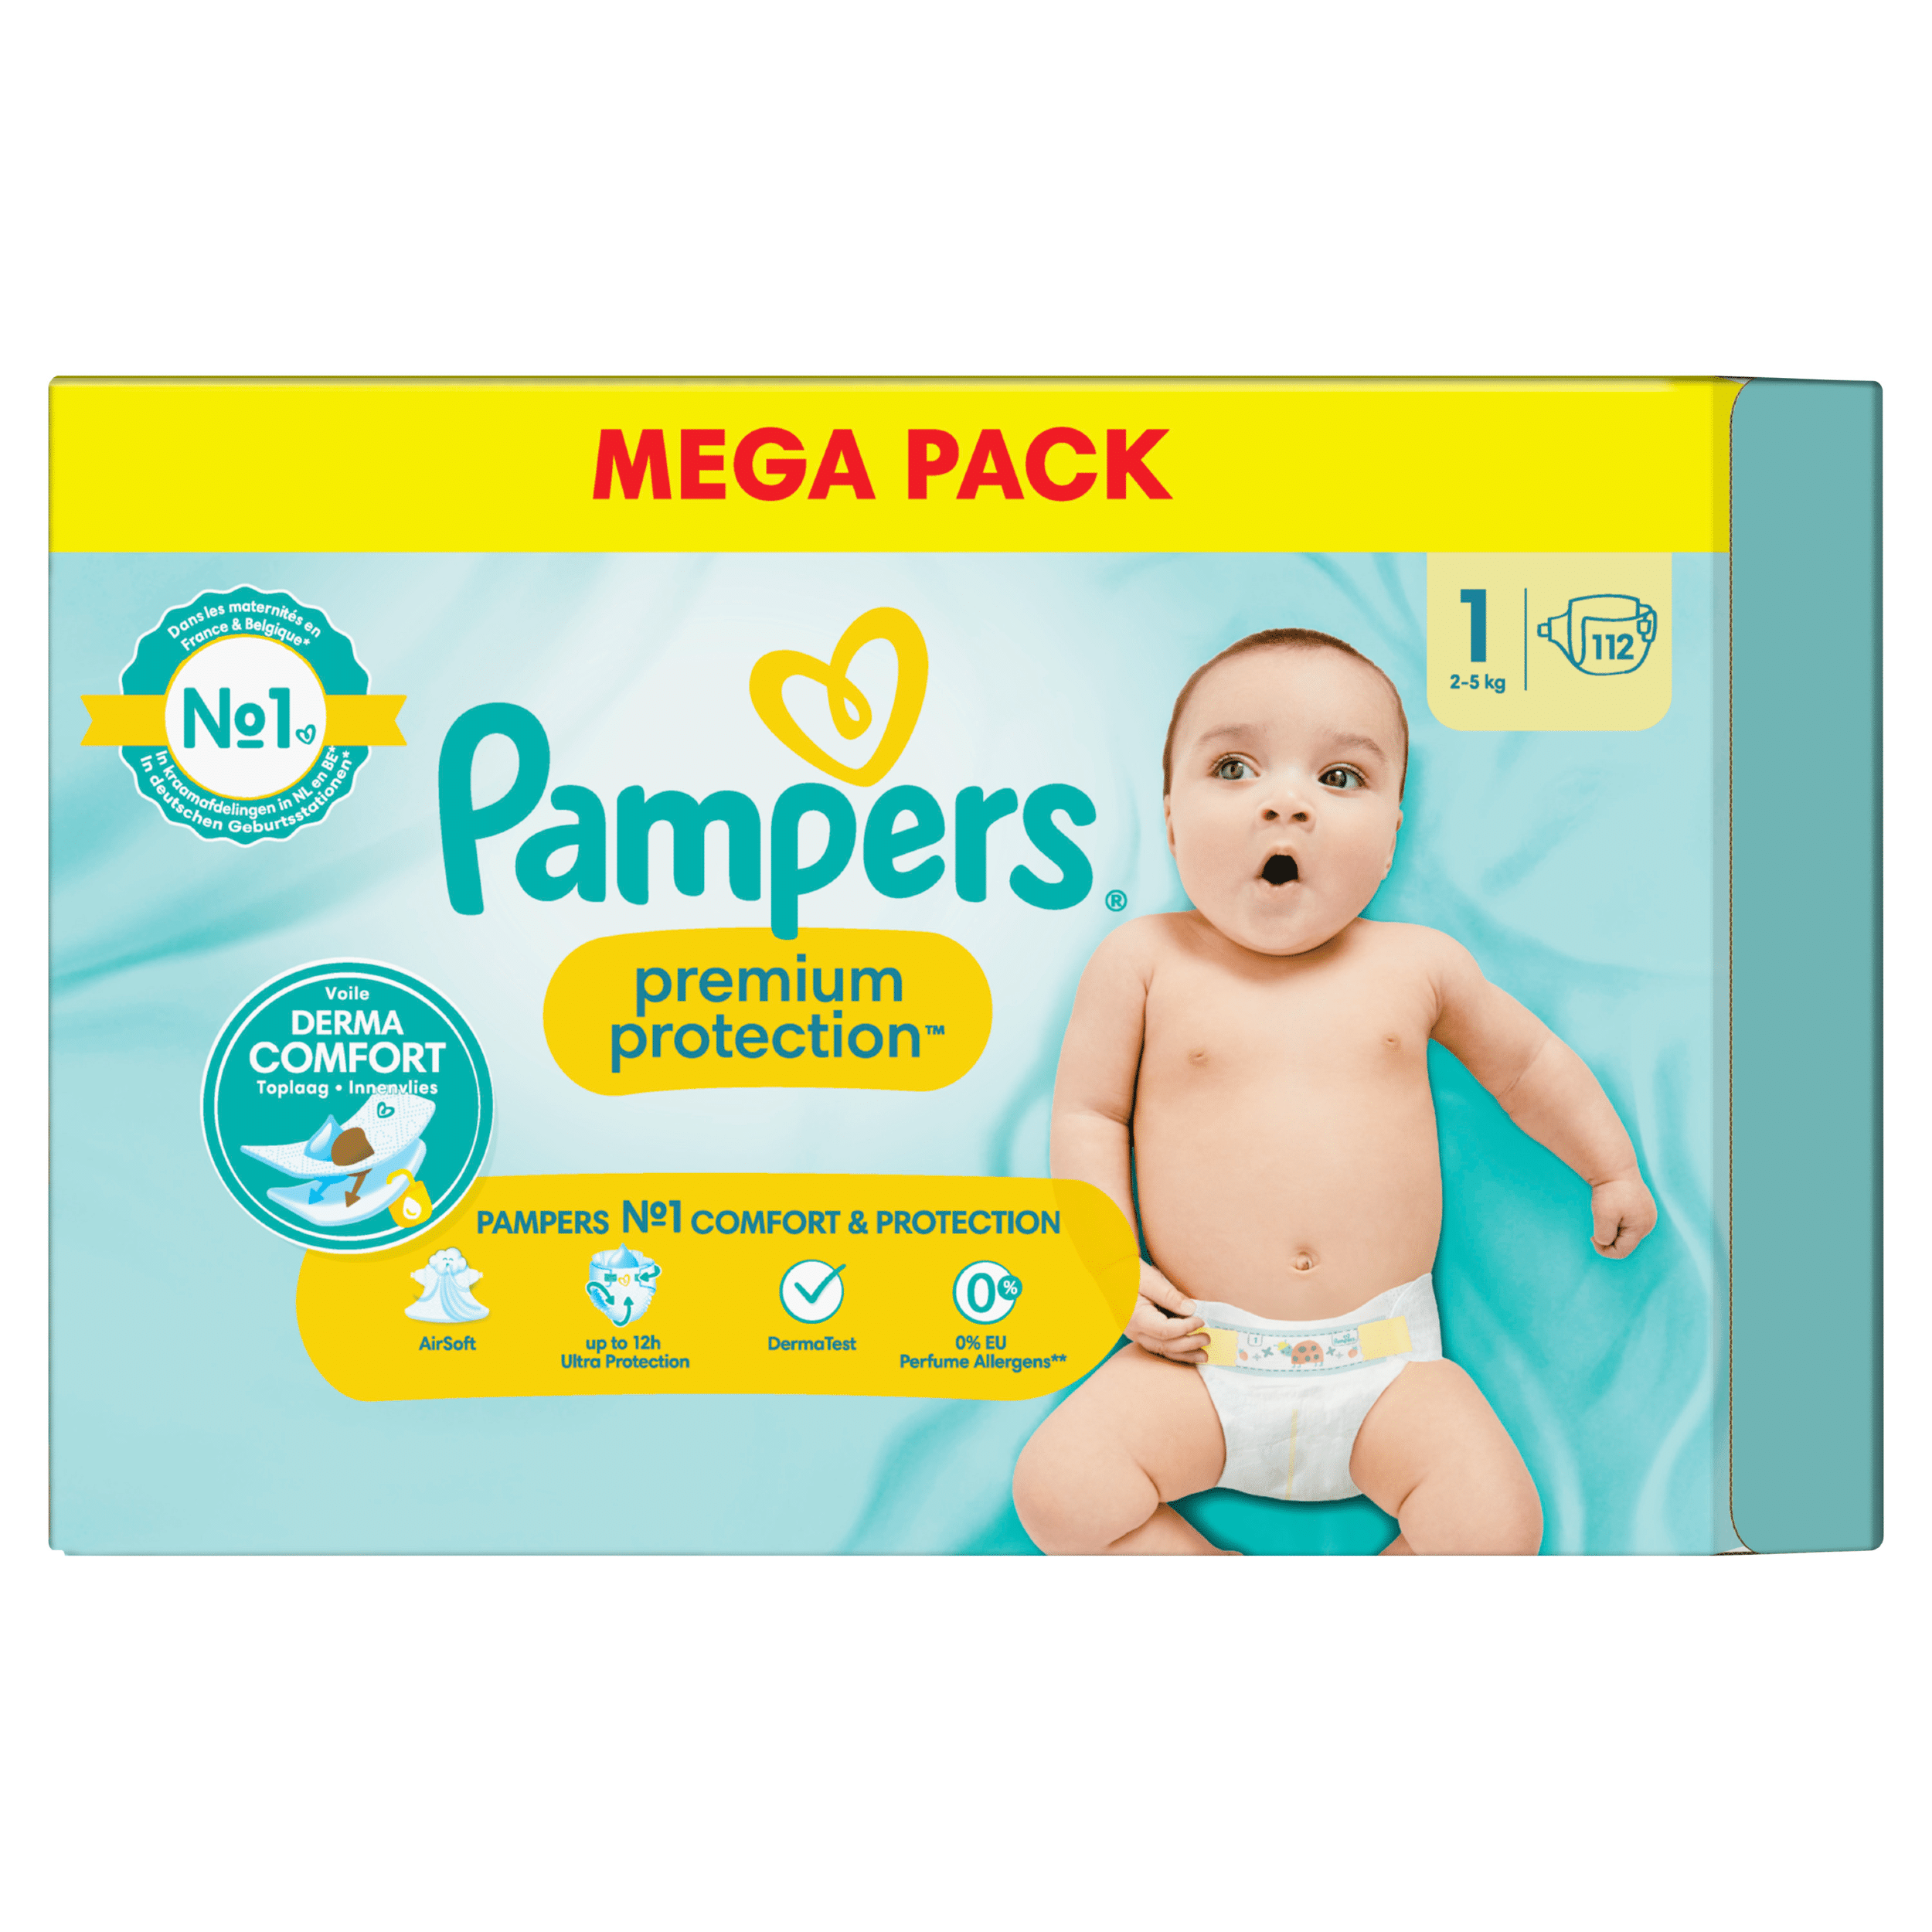 pieluchy pampers baby dry a pamper active